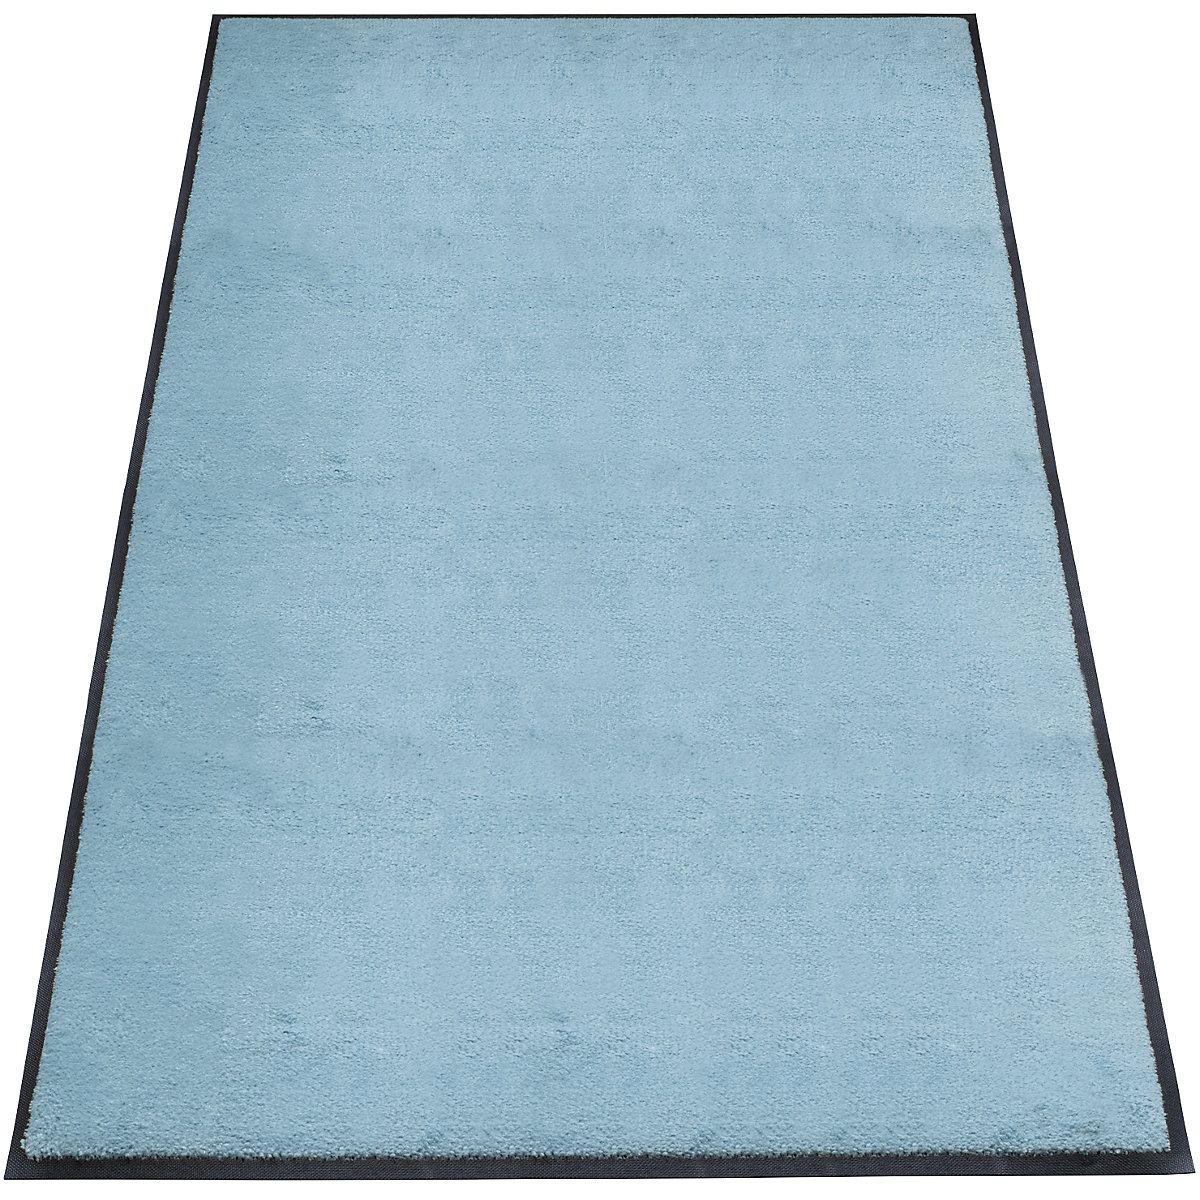 EAZYCARE STYLE entrance matting, LxW 2000 x 1200 mm, pearl gentian blue-5